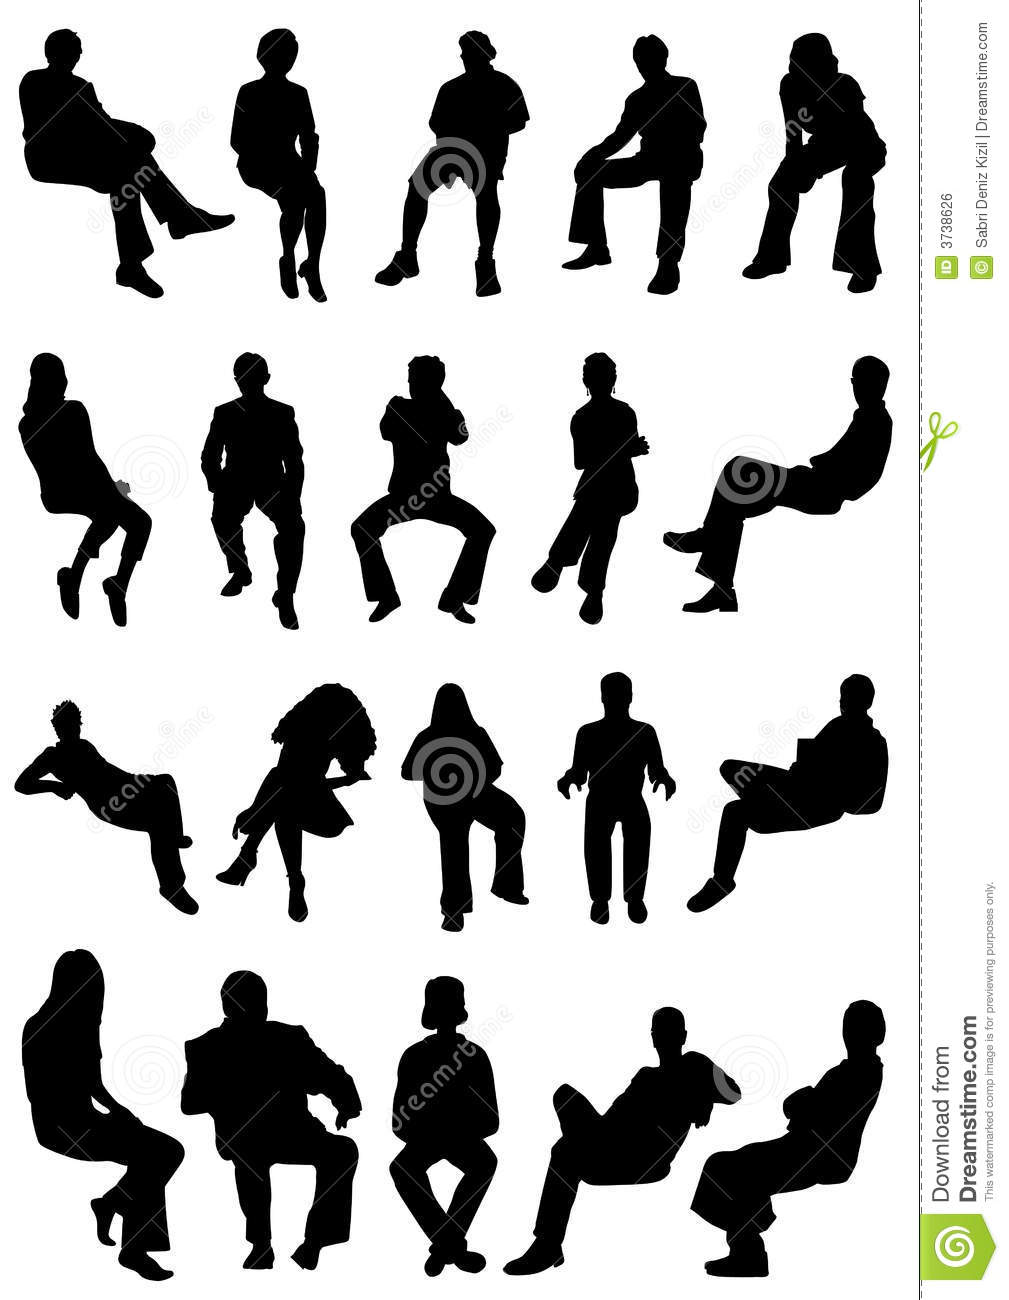 Collection Of Sitting People Vector Royalty Free Stock Image   Image